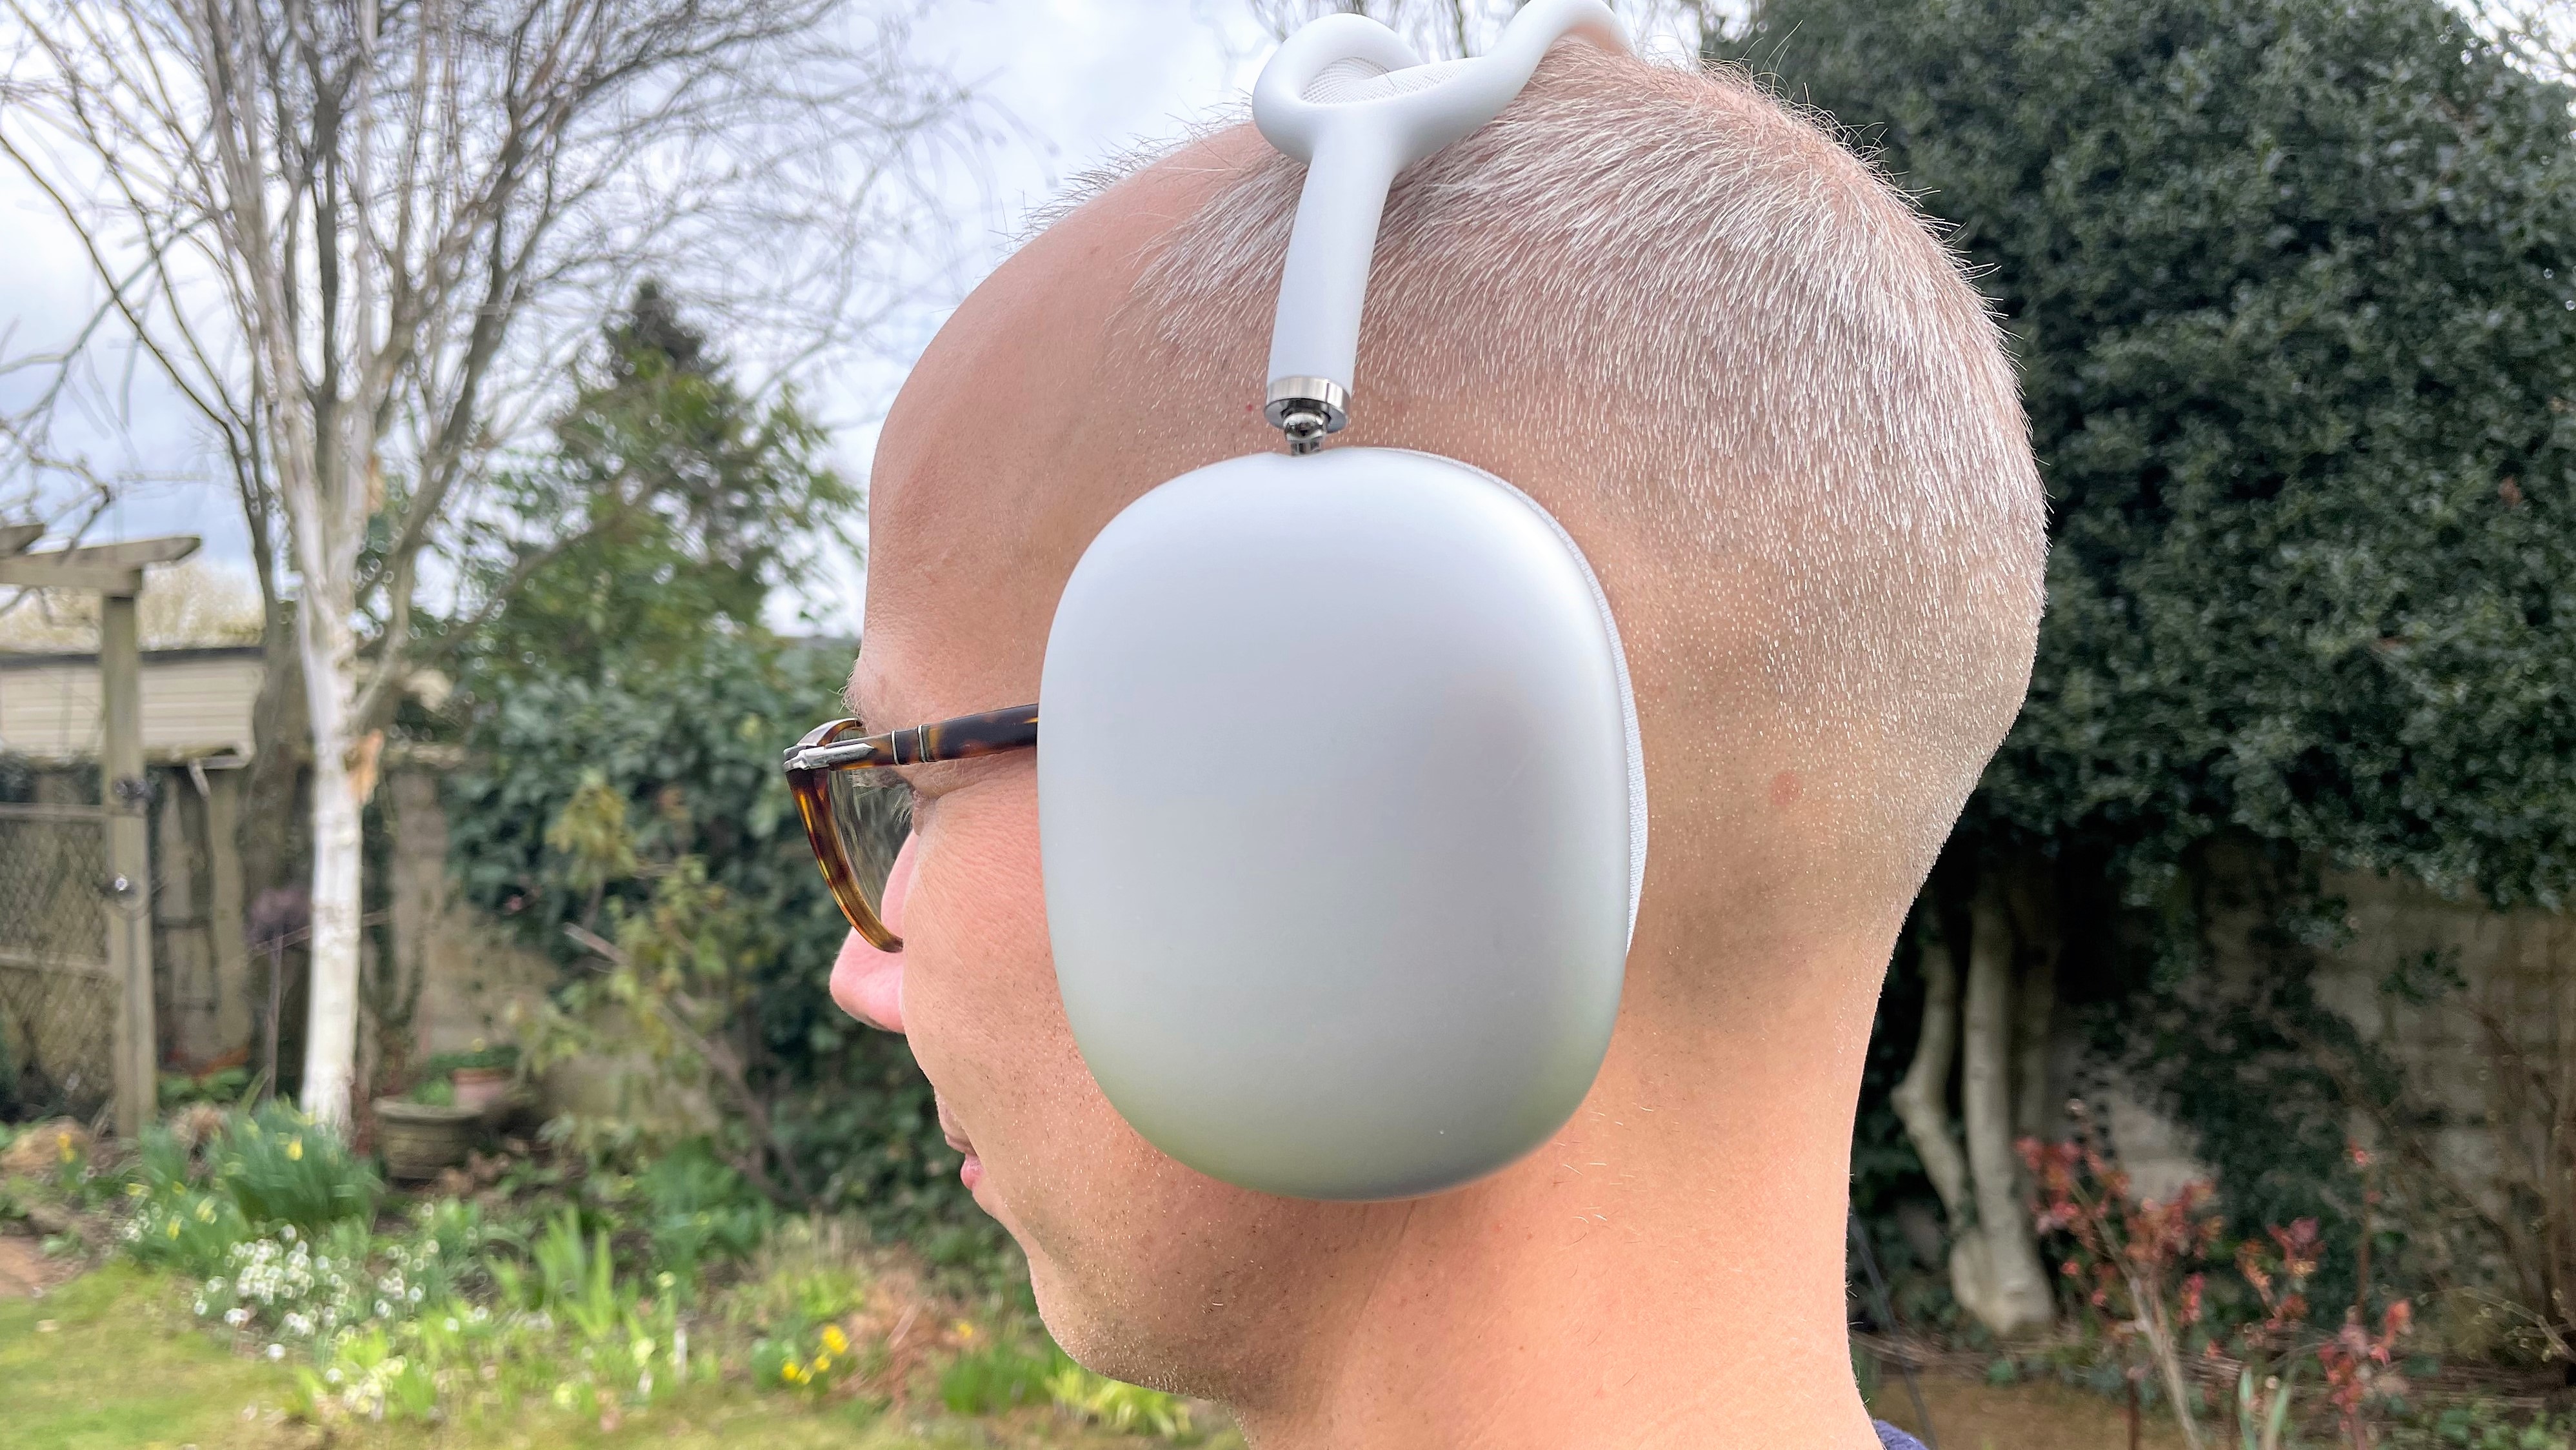 Apple AirPods Max worn by the reviewer in the park